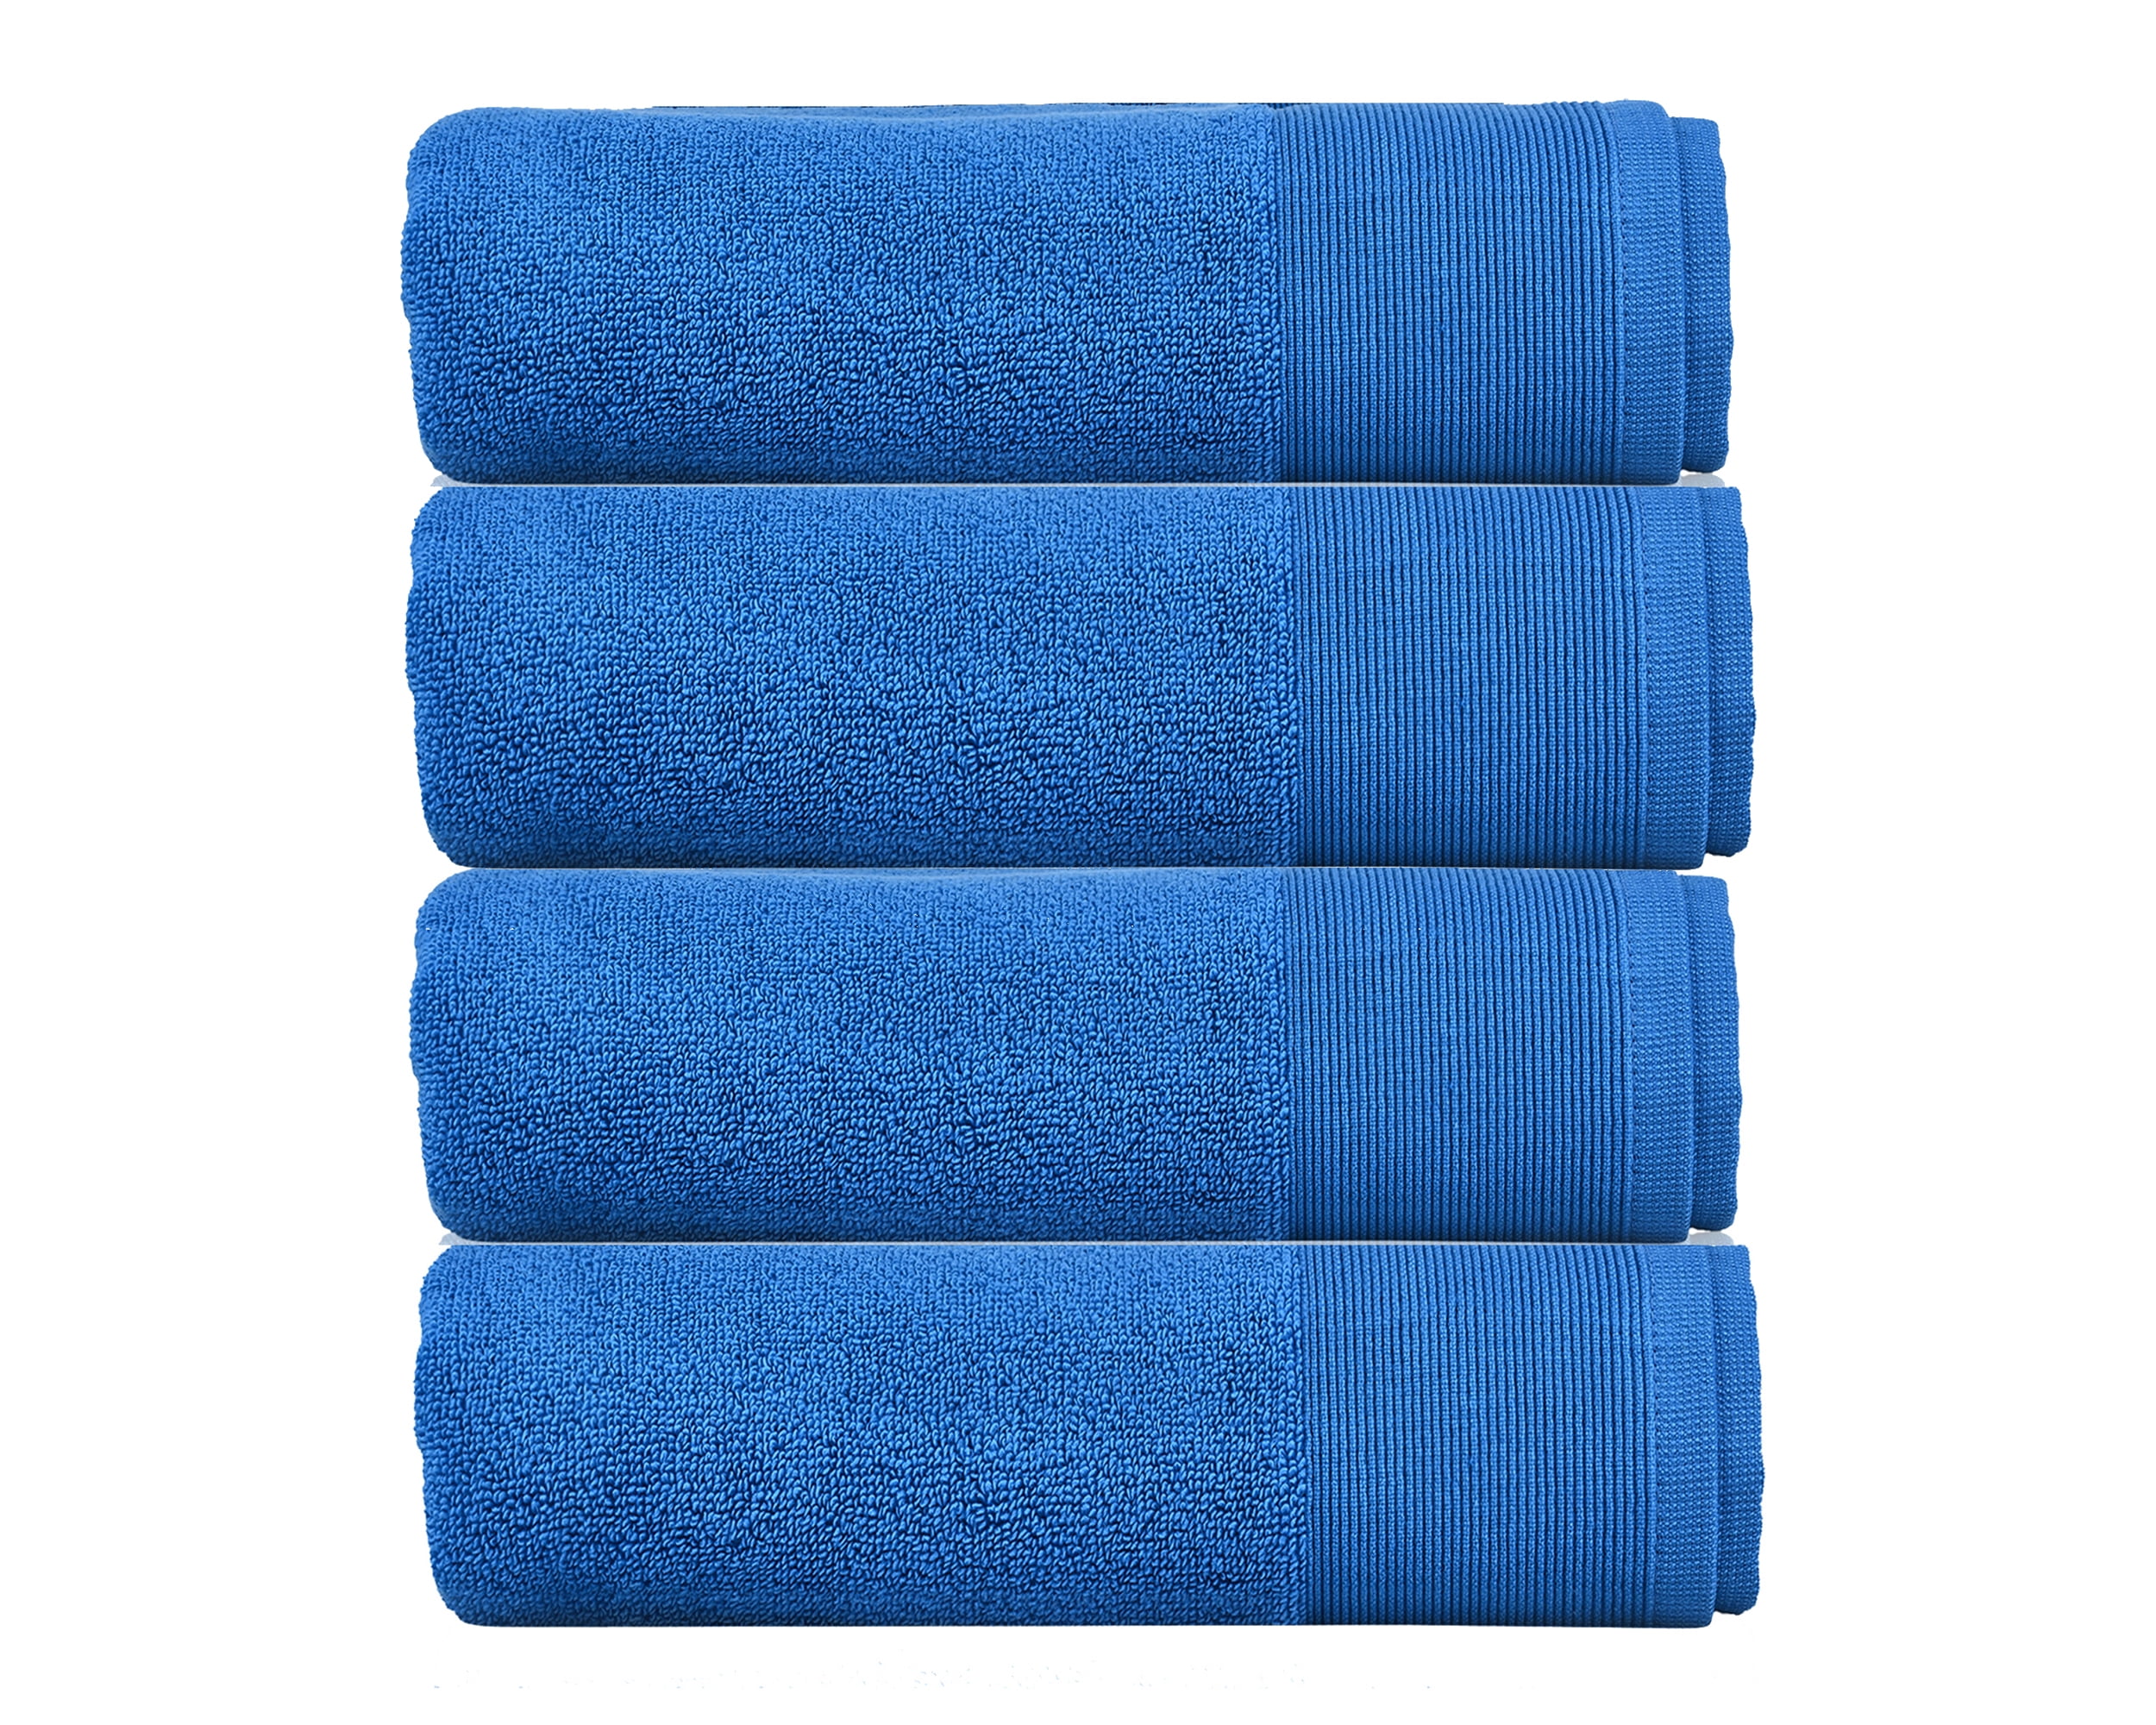 Details about   Set of 6 Large Bath Towel Sheets 100% Cotton 27"x55" 500 GSM Highly Absorbent 